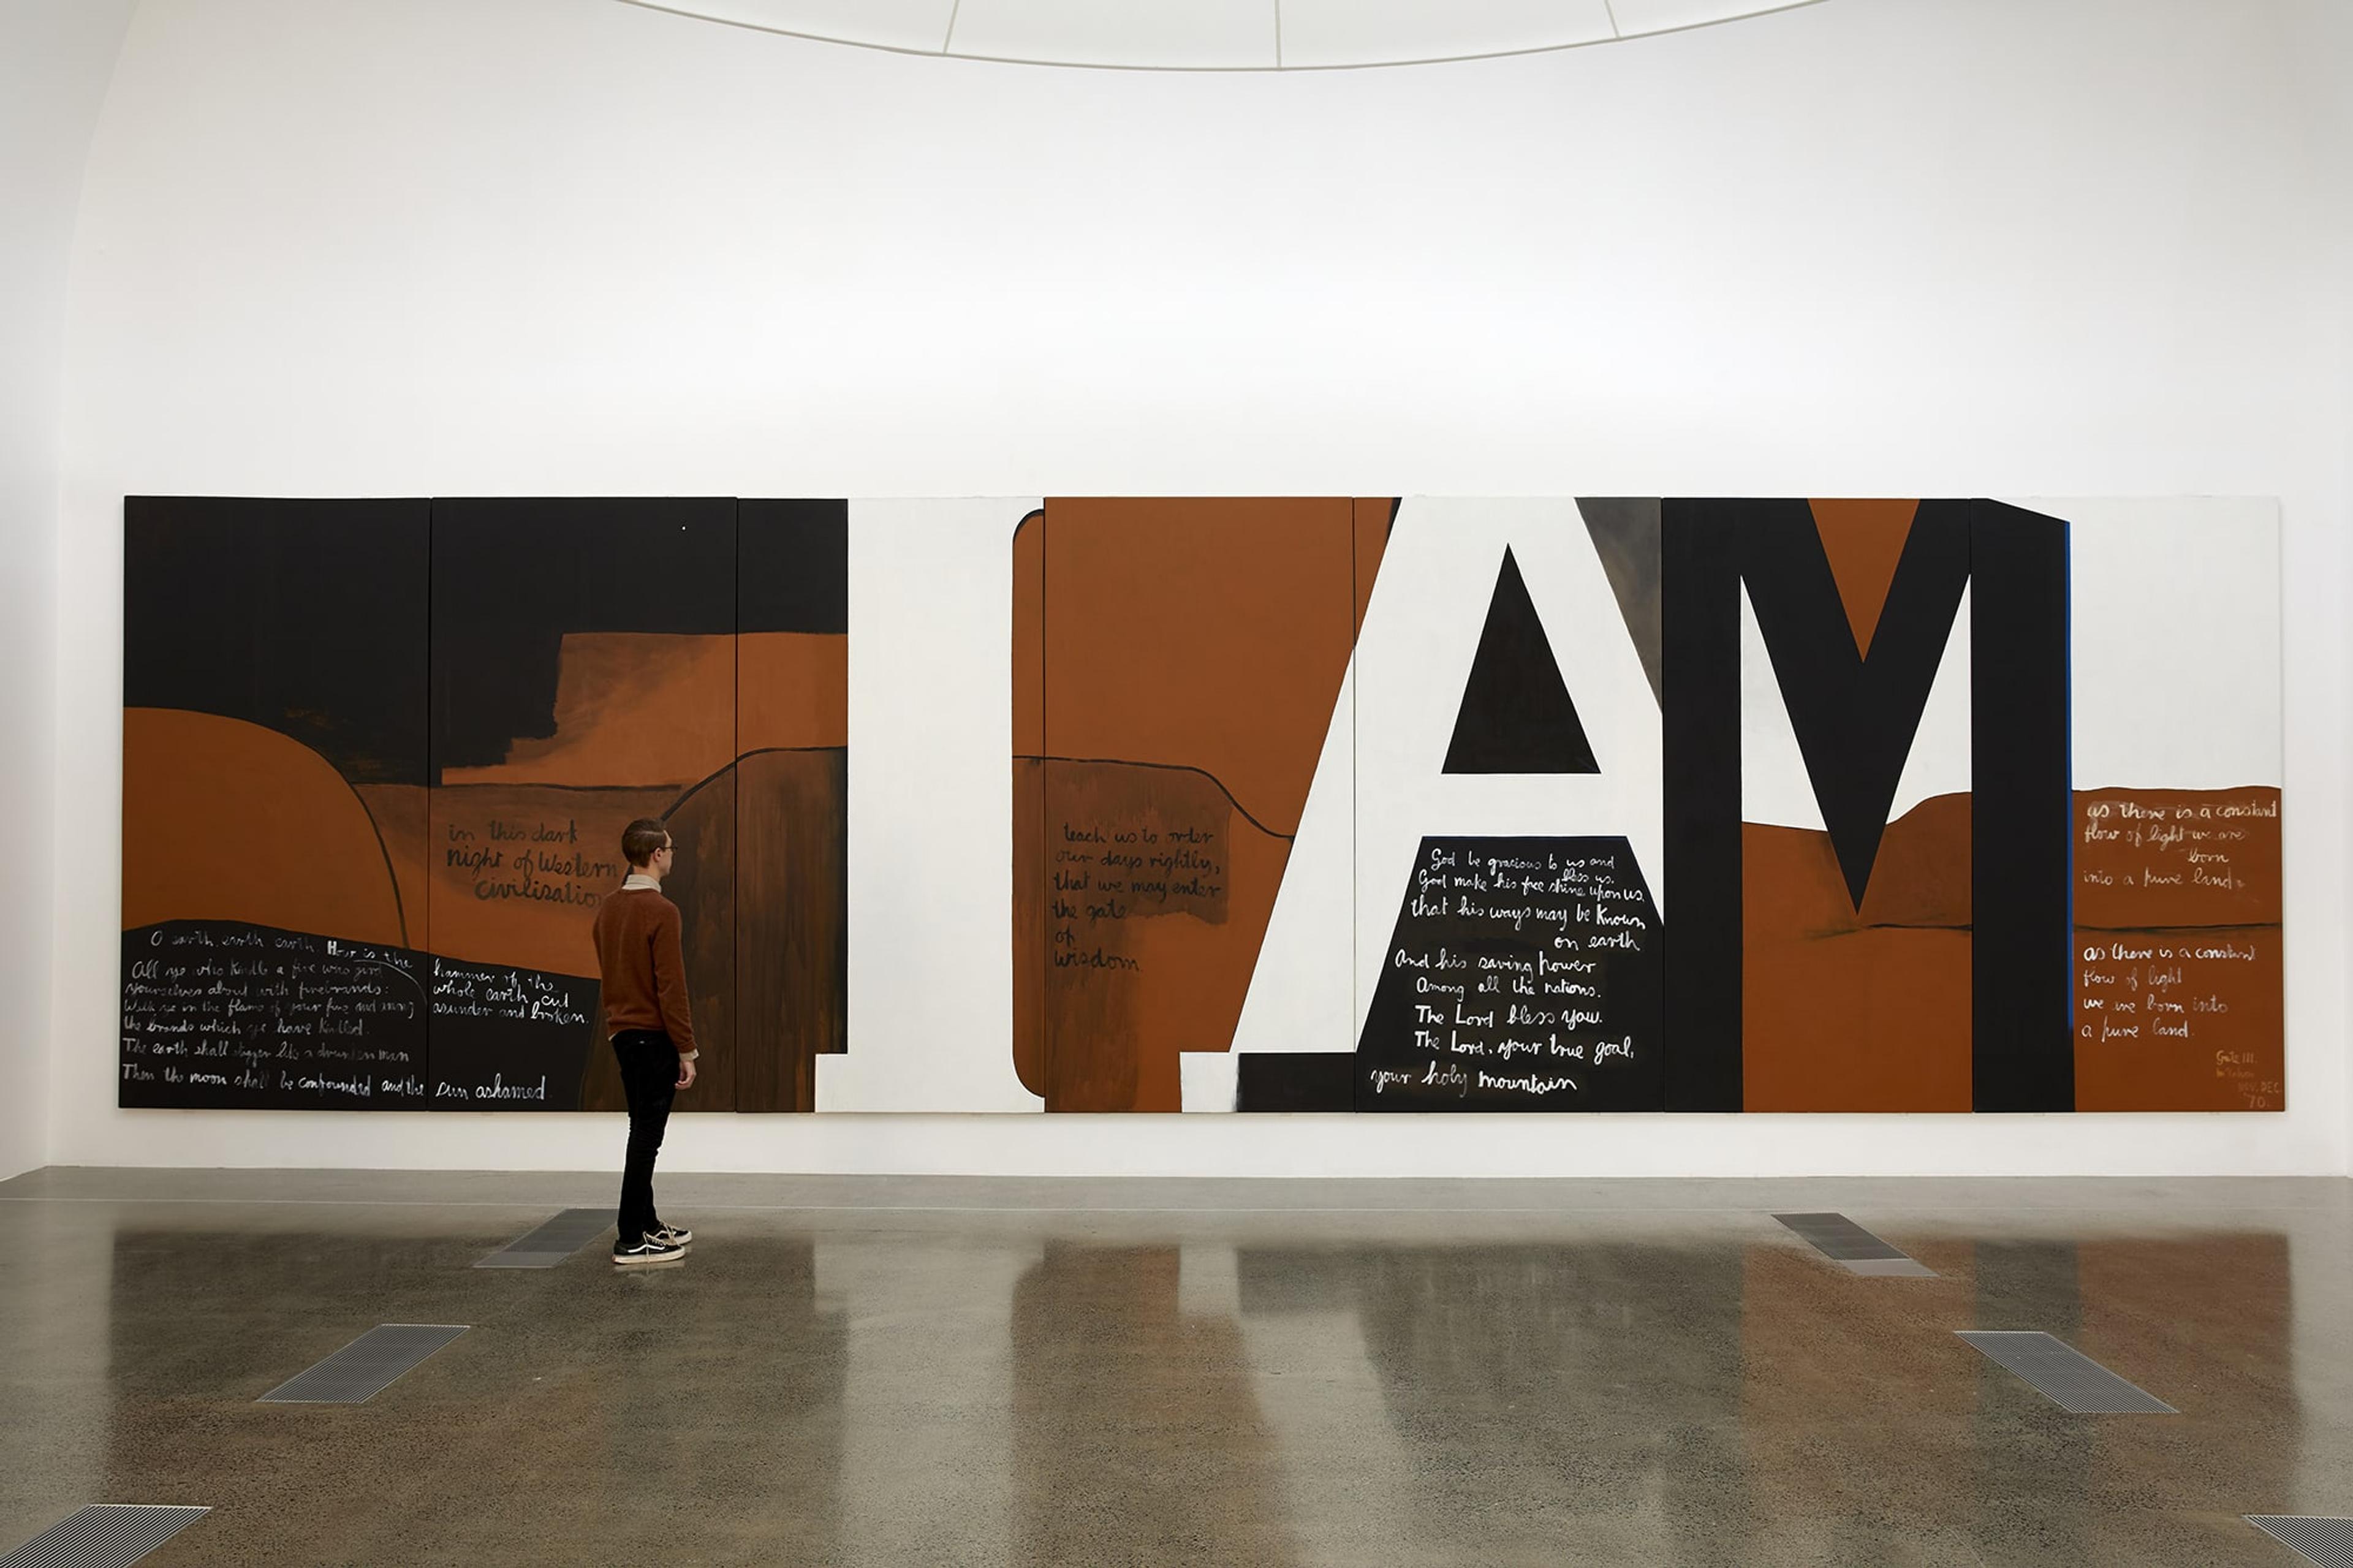 Installation view, A way through: Colin McCahon’s Gate III at Te Uru Waitakere Contemporary Gallery, 24 August–20 October 2019. Photo by Sam Hartnett